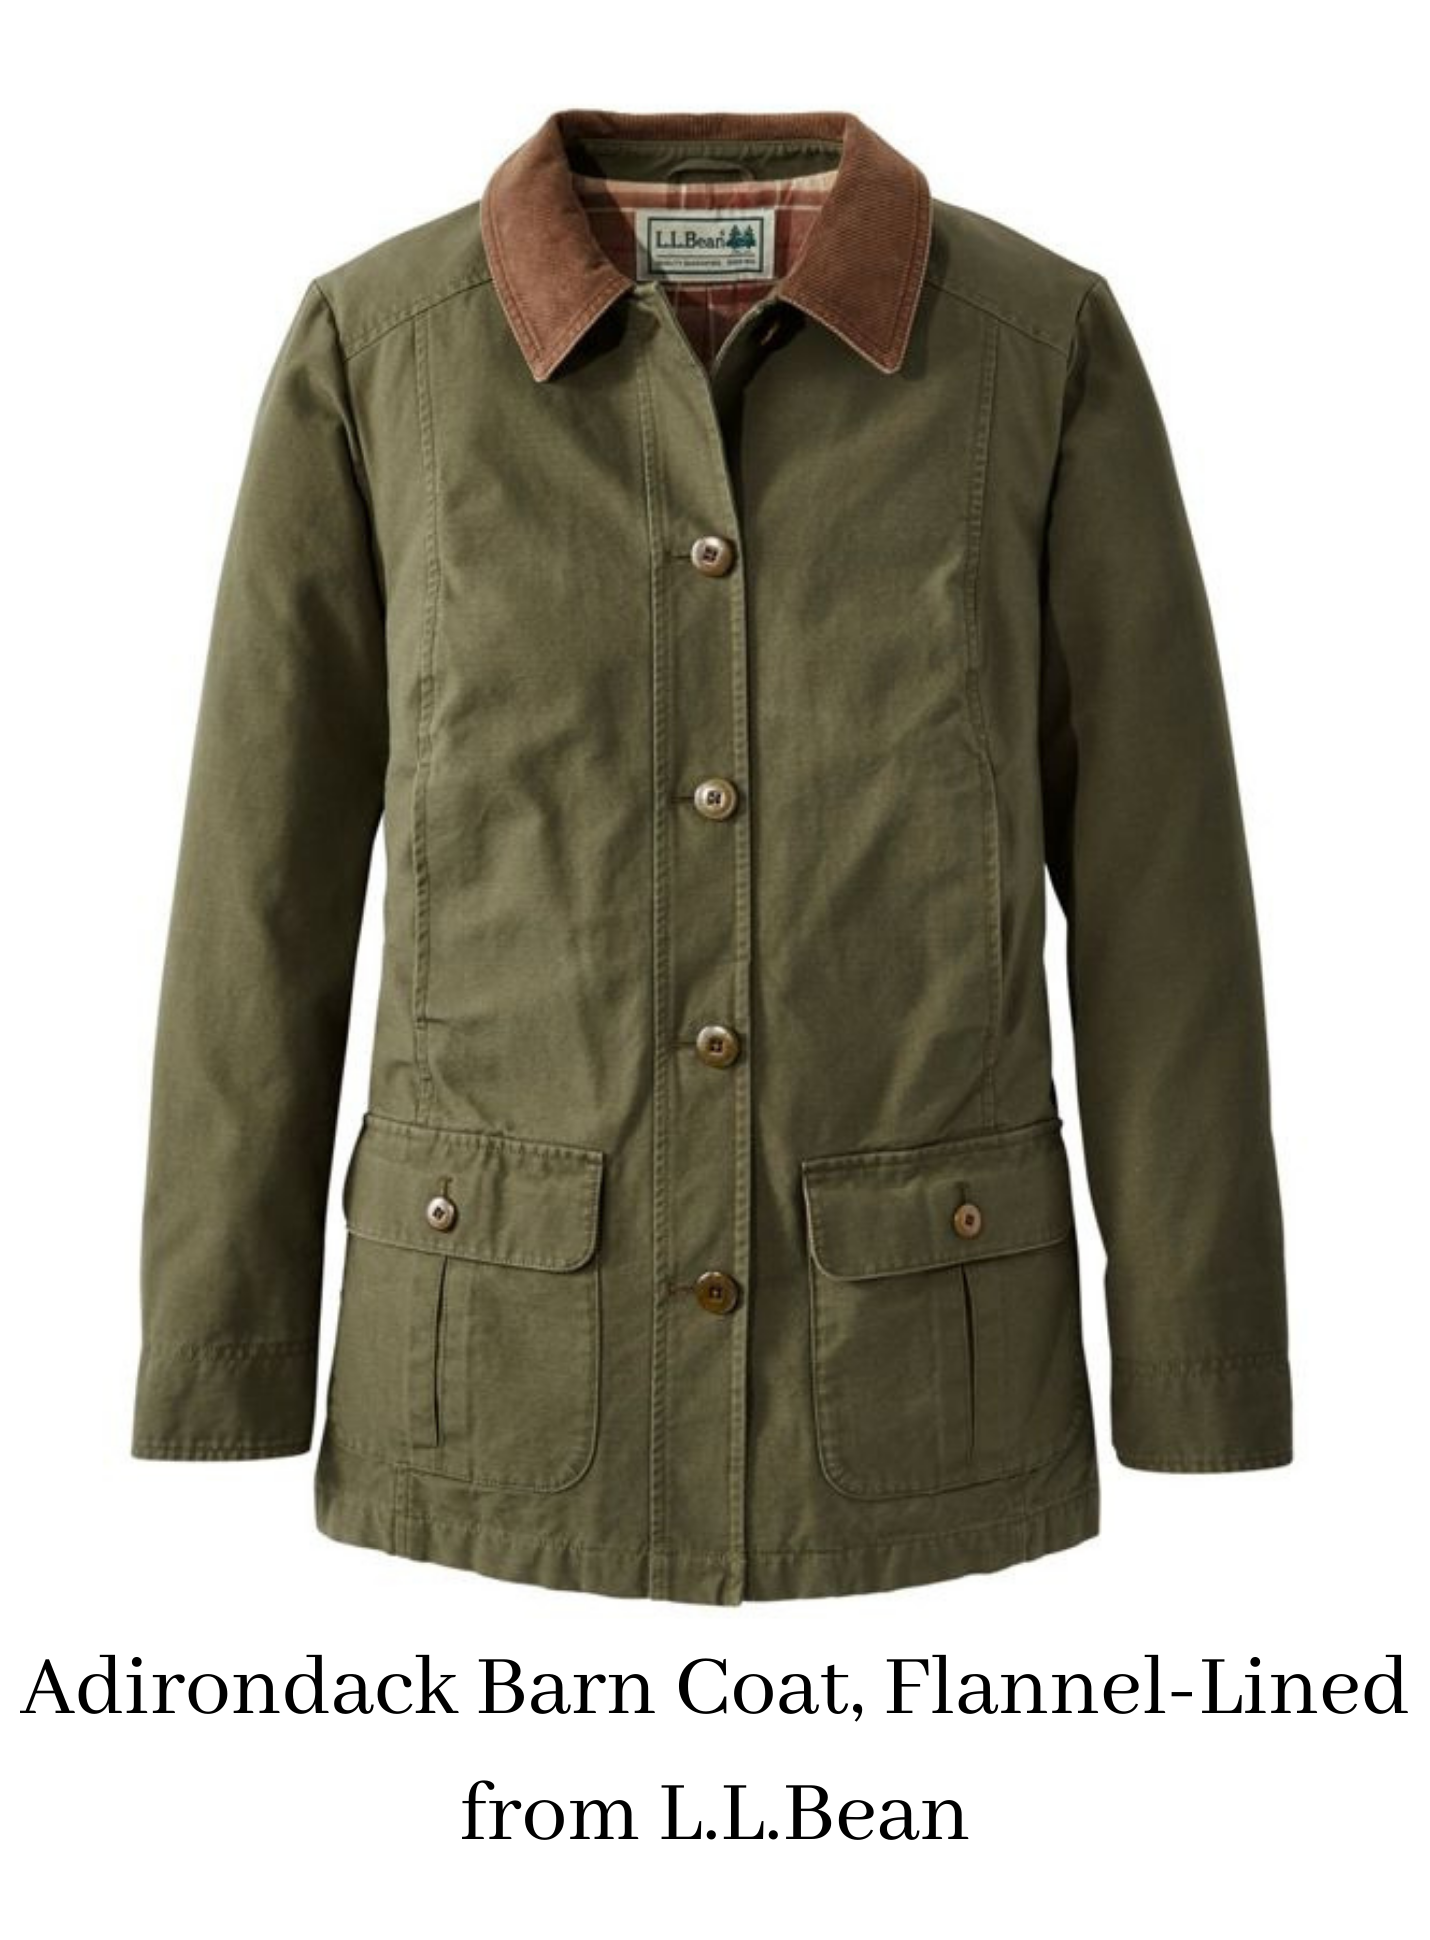 Adirondack Barn Coat, Flannel-Lined from L.L.Bean